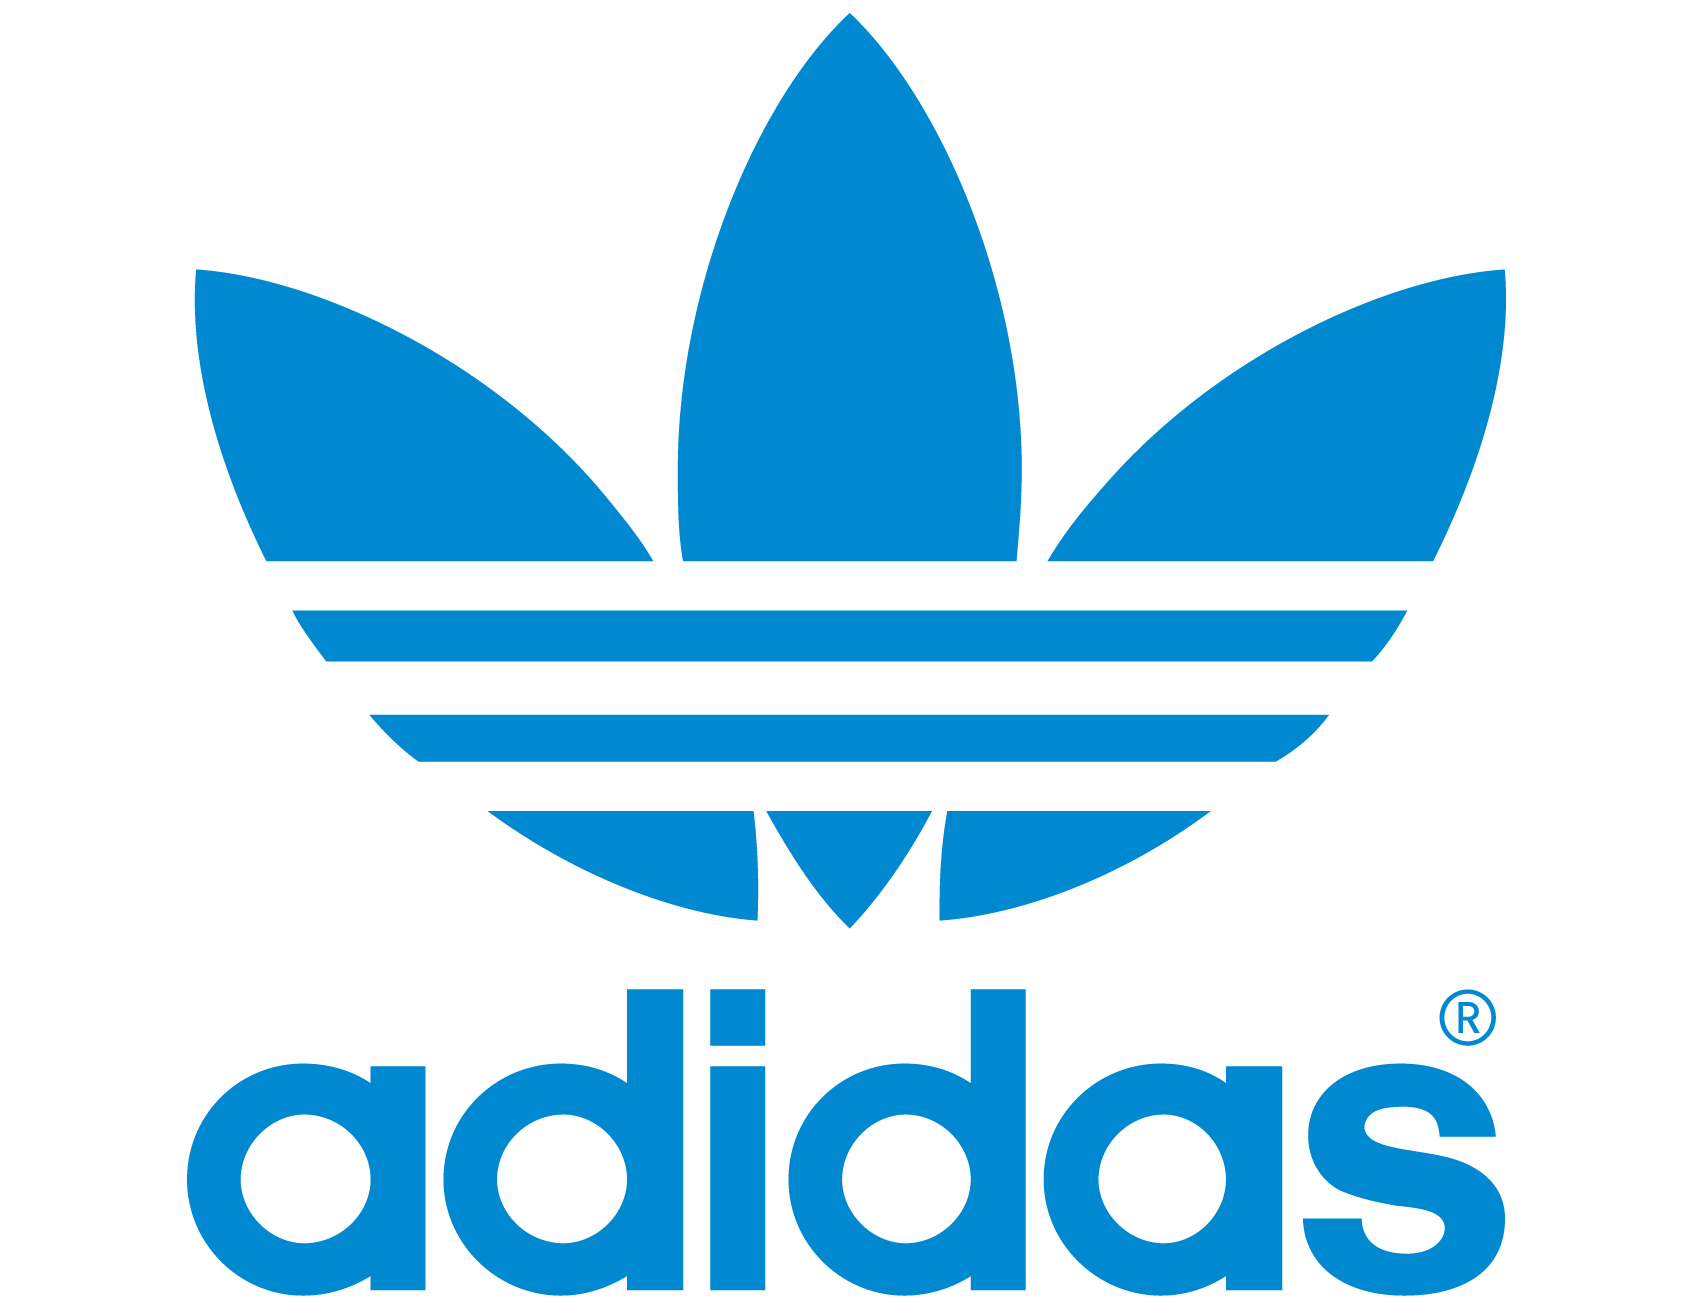 I created a brush with the adidas logo and another brush with a fingerprint 